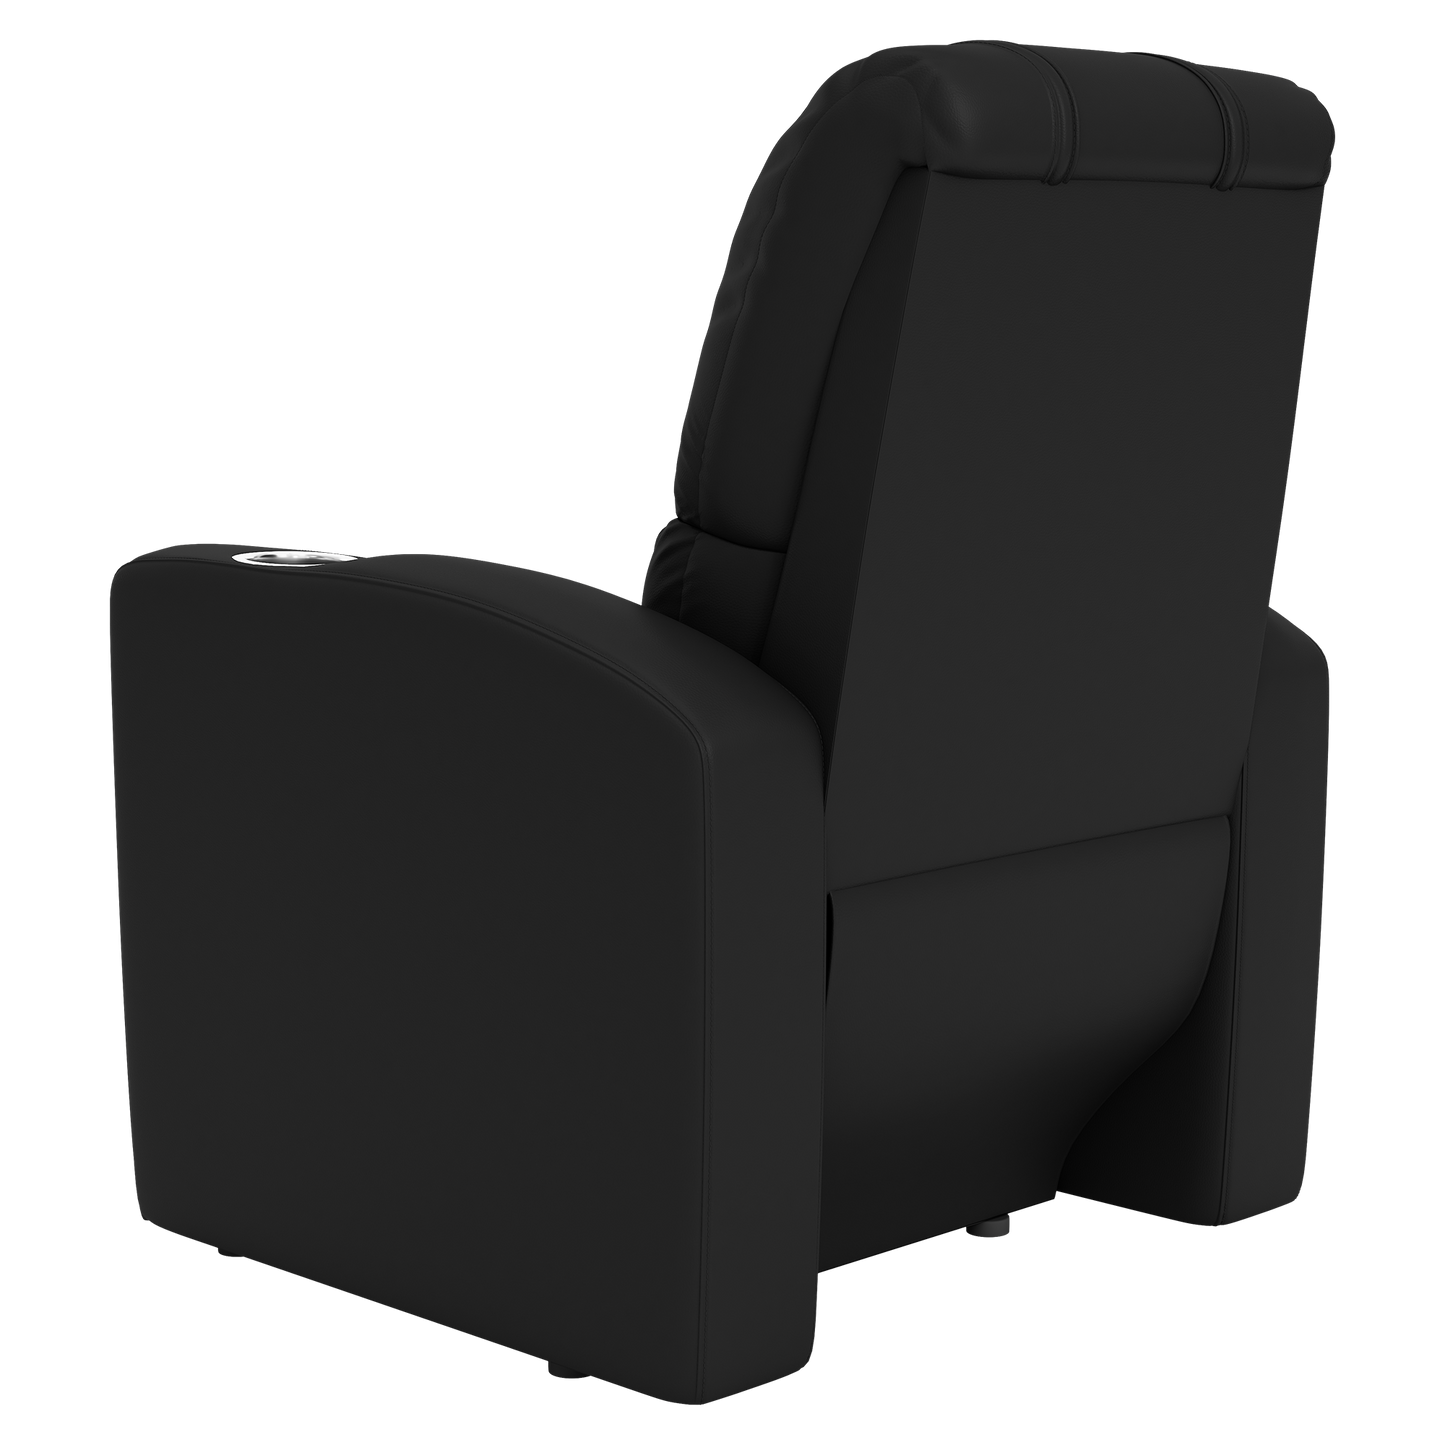 Stealth Recliner with Chicago White Sox Secondary